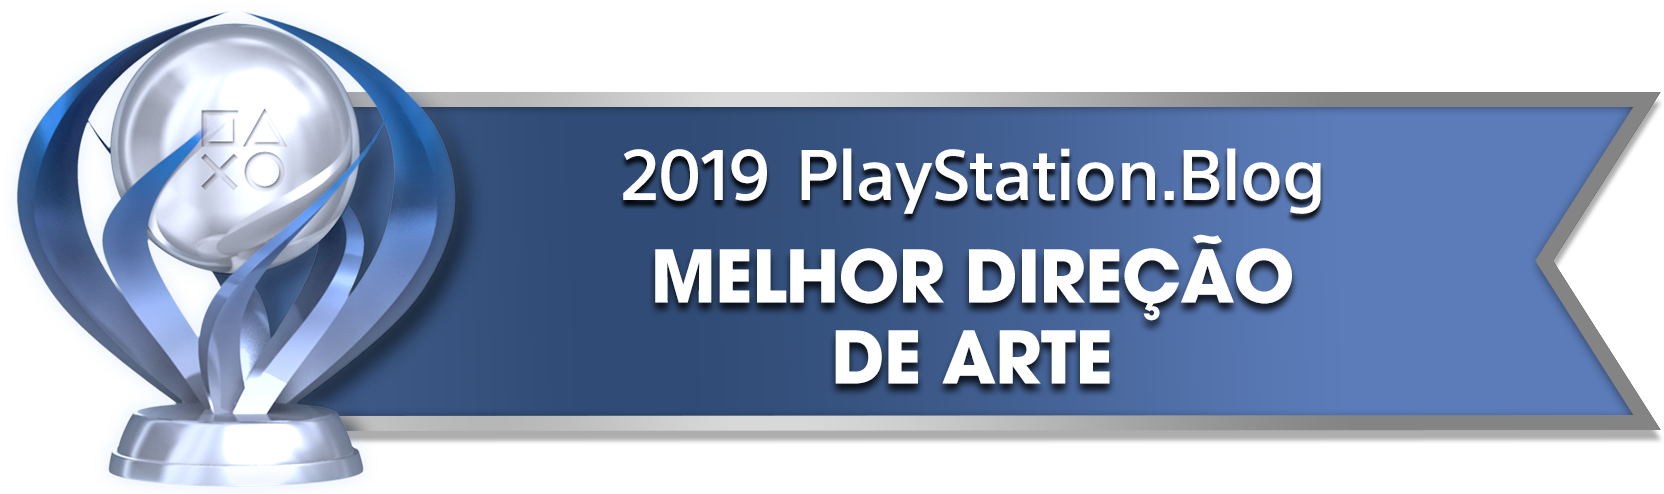 PS Blog Game of the Year 2019 - Best Art Direction - 1 - Platinum